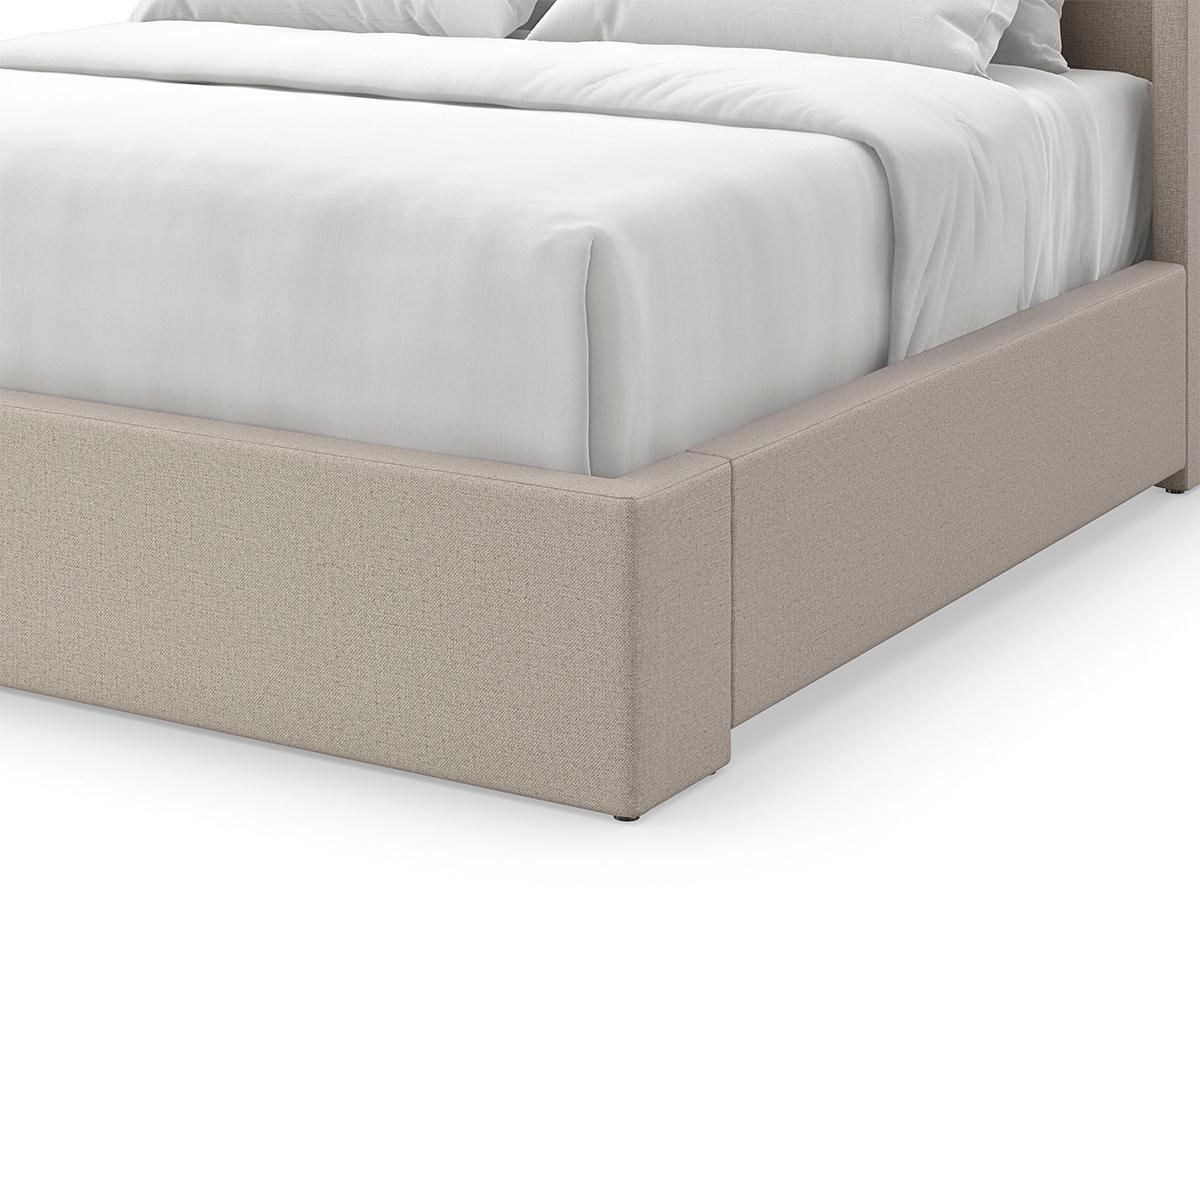 Flared Modern Fully Upholstered King Bed - Oatmeal In New Condition For Sale In Westwood, NJ